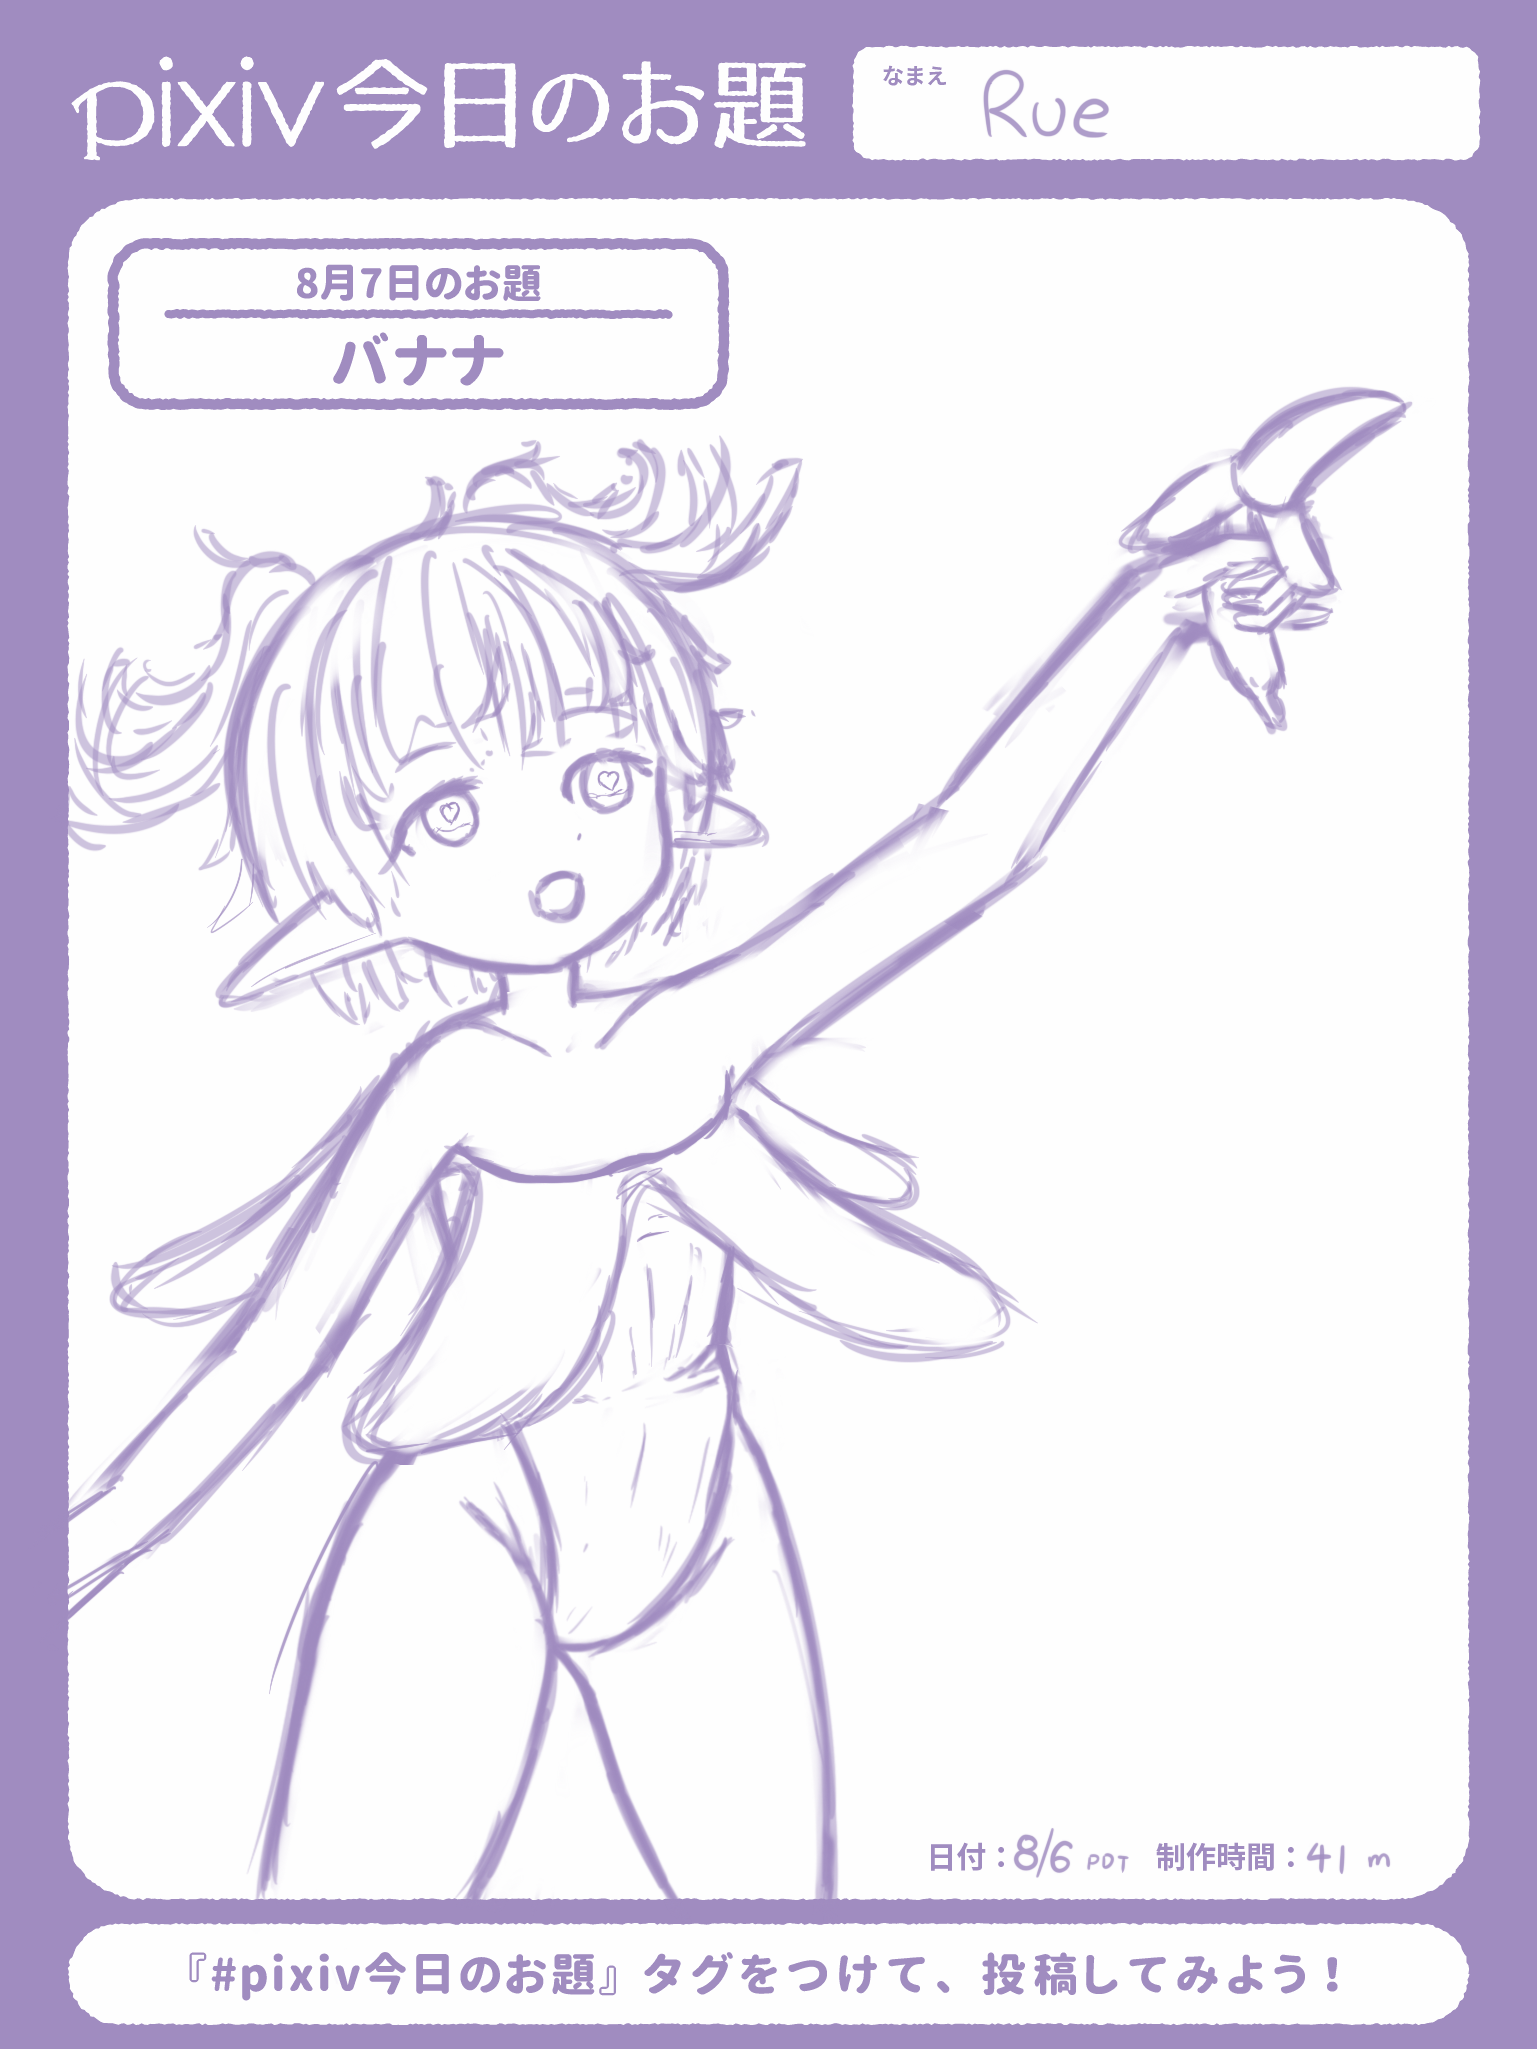 My sketch for today’s pixiv今日のお題-sensei theme, バナナ. I recolored the border to my signature shade of purple. The sketch features me in a banana suit (um, I guess it’s like a leotard or bunny suit but the top of it is like a peeled banana?) holding a banana up. That’s pretty much it for the sketch…